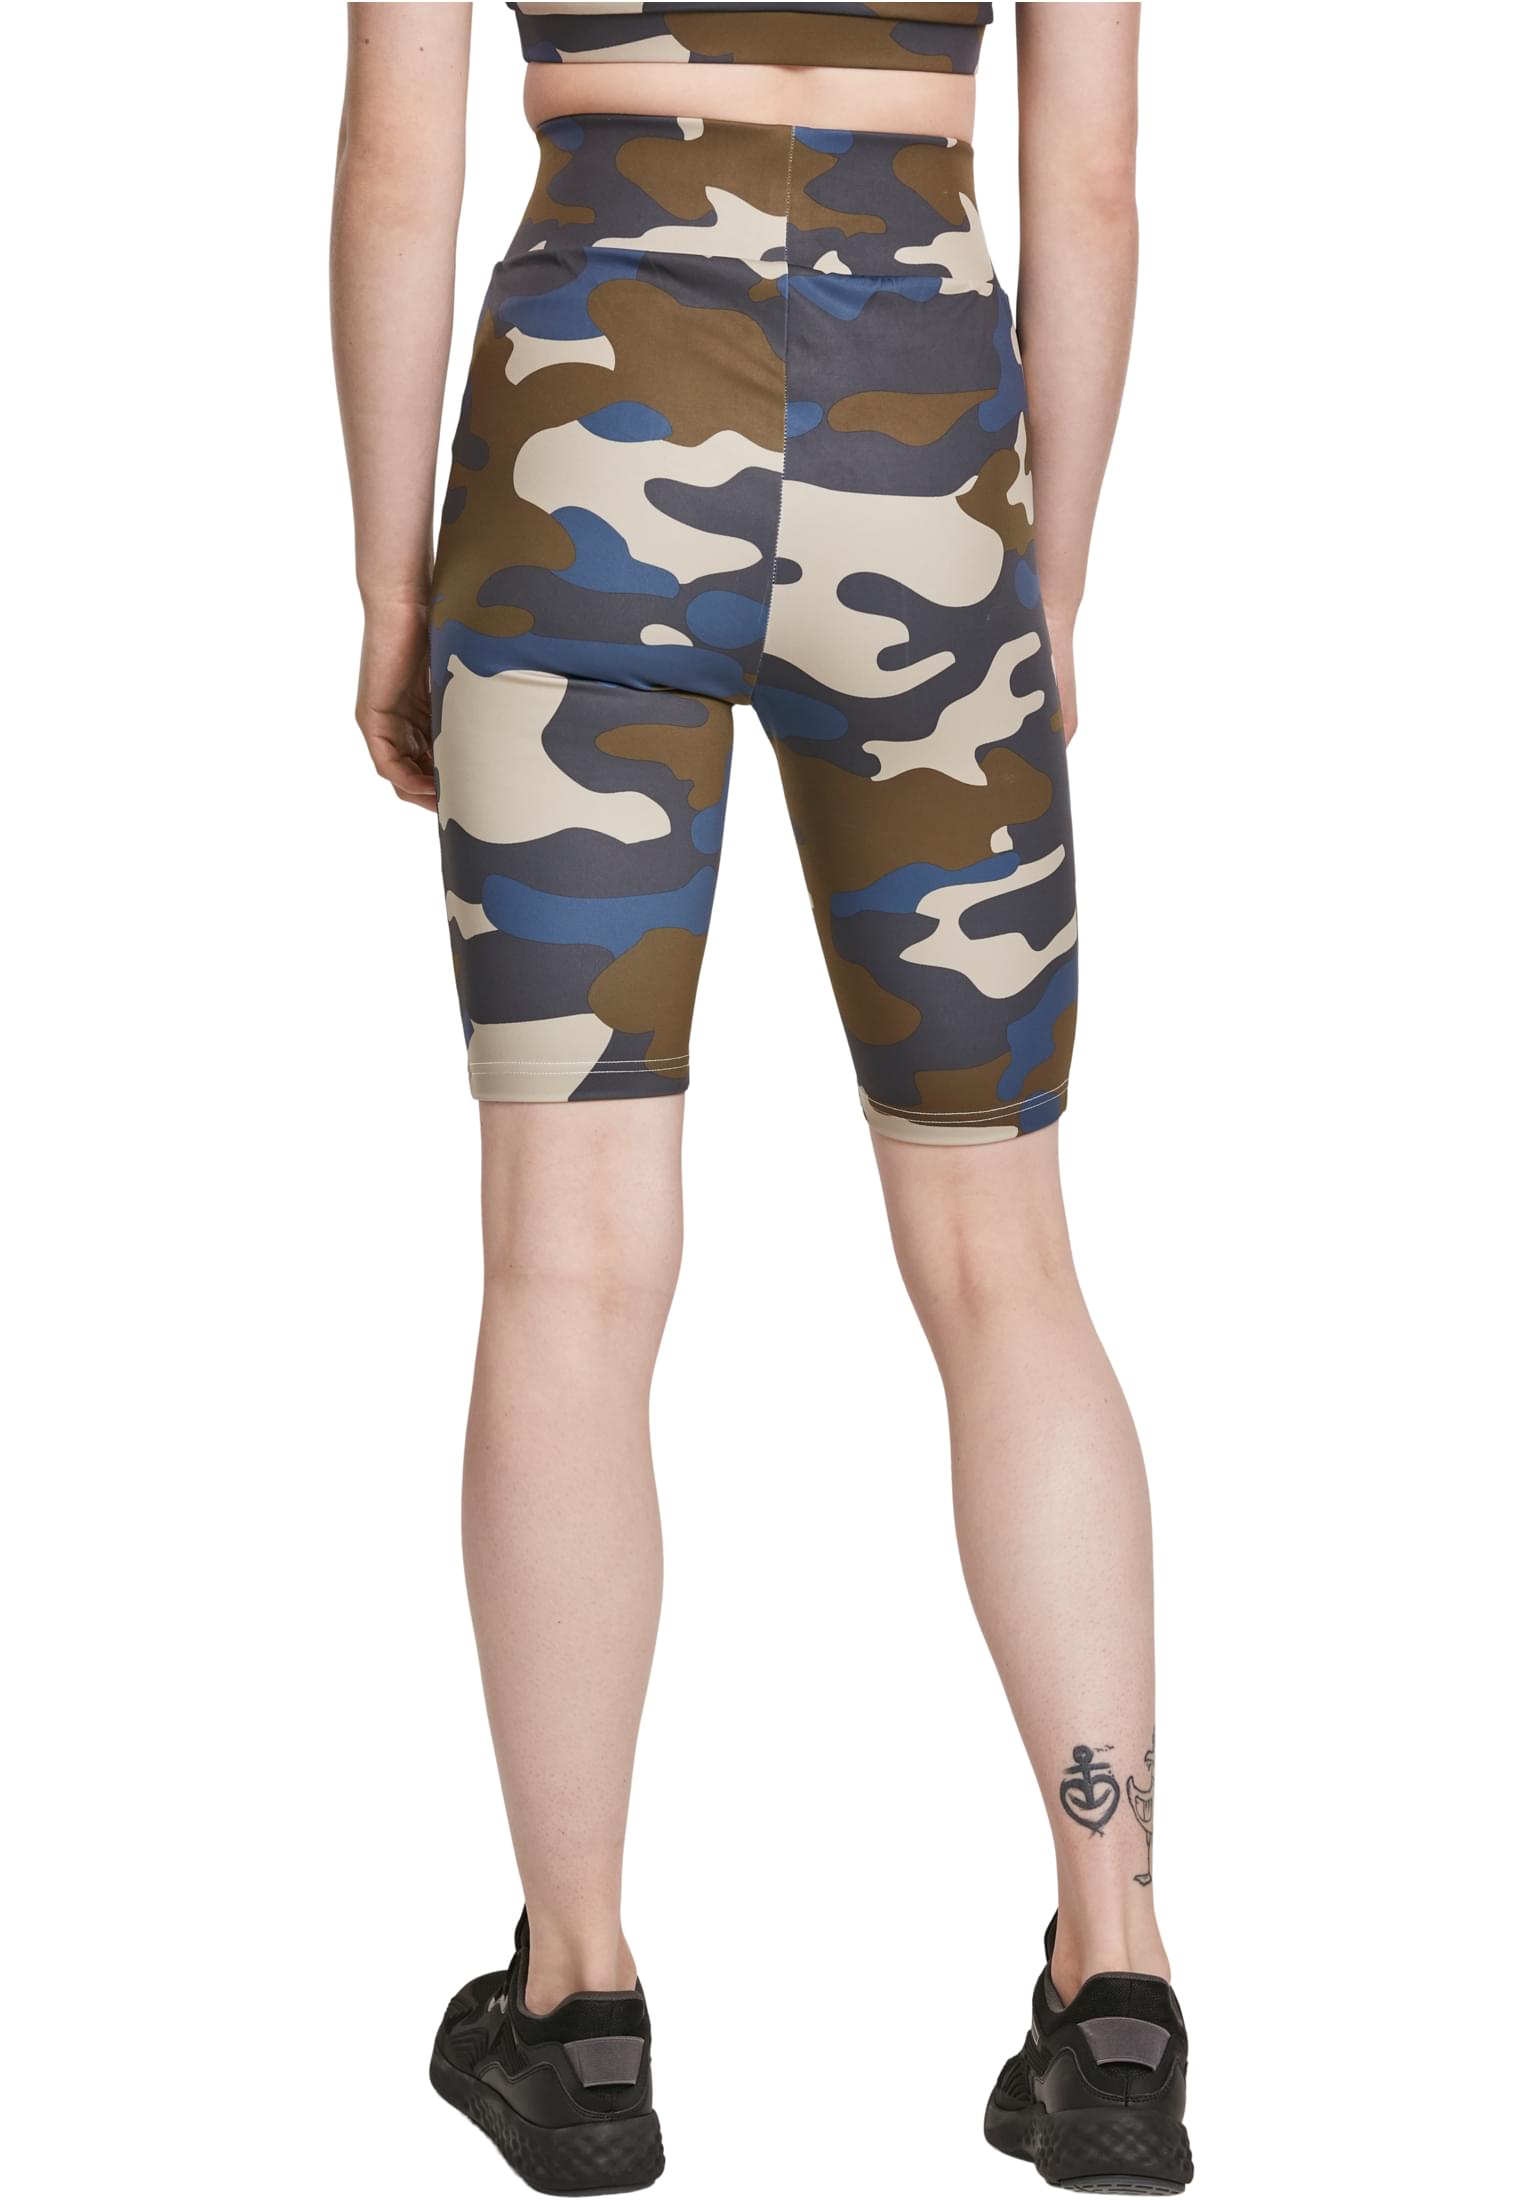 Bekleidung Ladies High Waist Camo Tech Cycle Shorts Double Pack in Farbe summerolive camo/summerolive